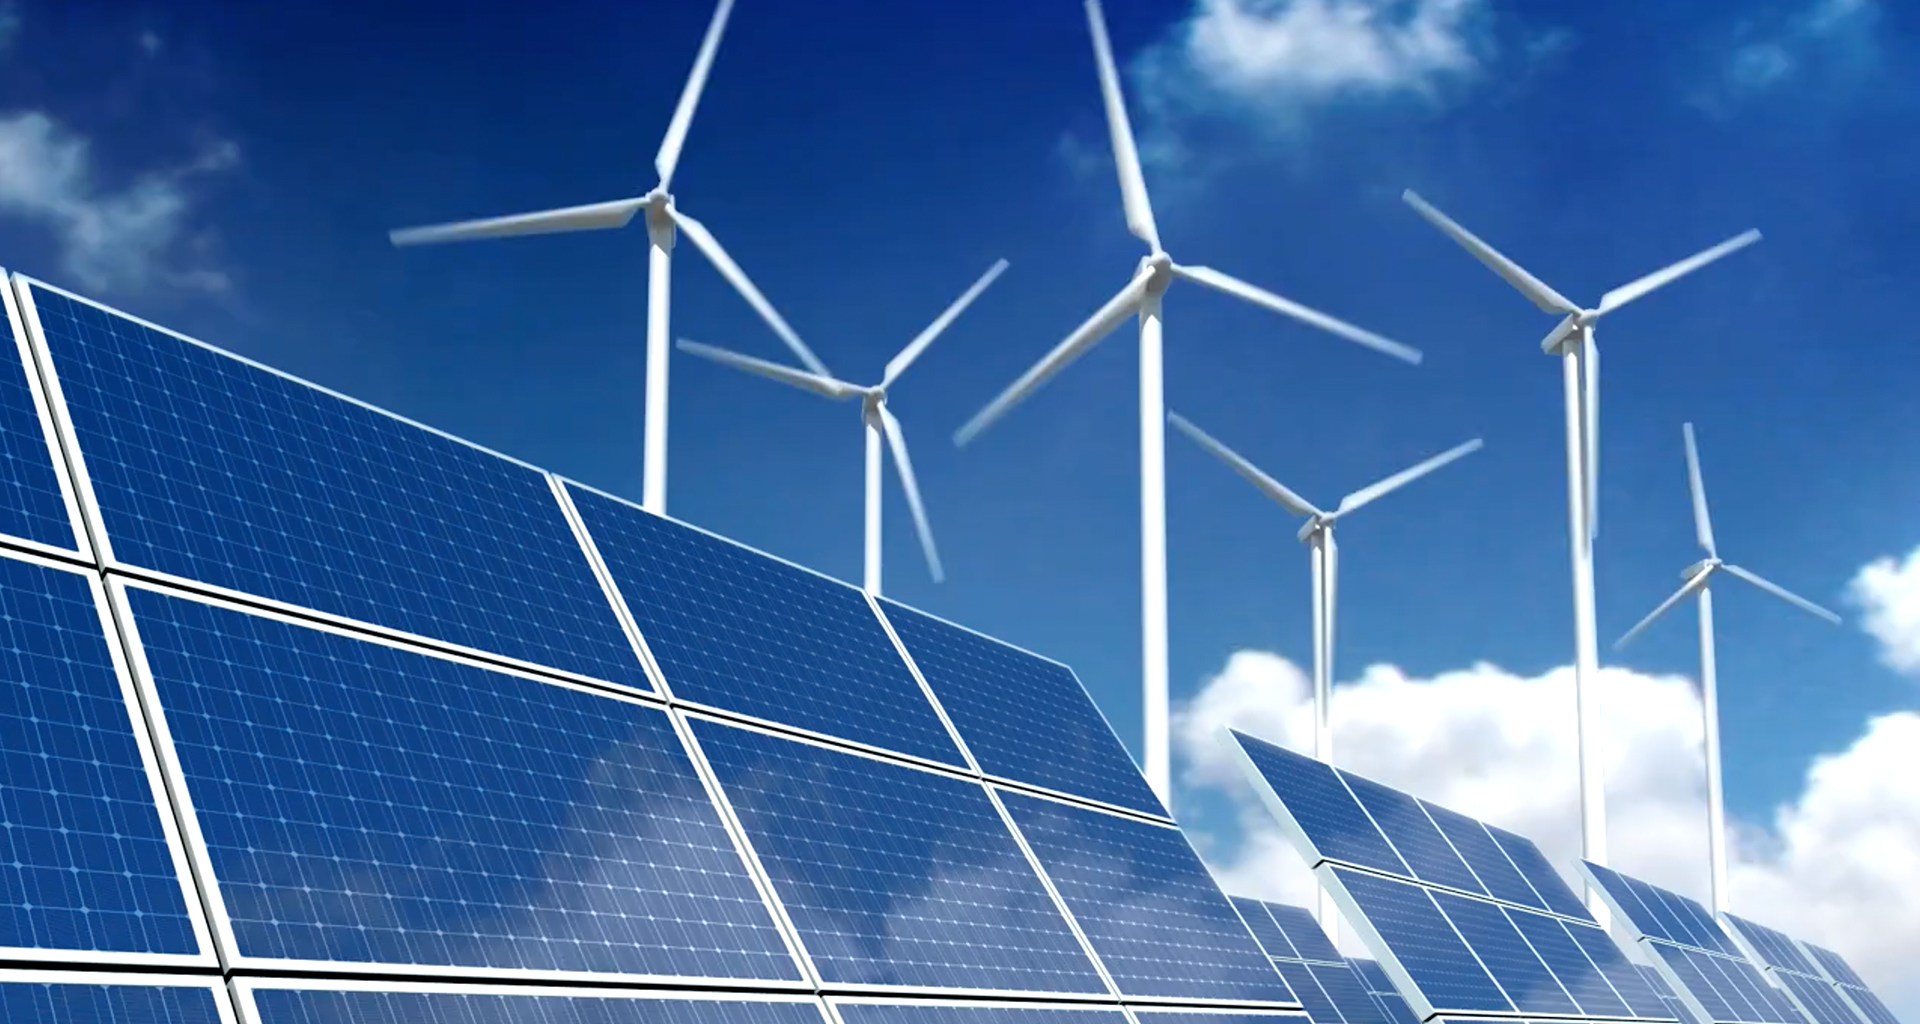 Wind turbines and solar panels for renewable energy